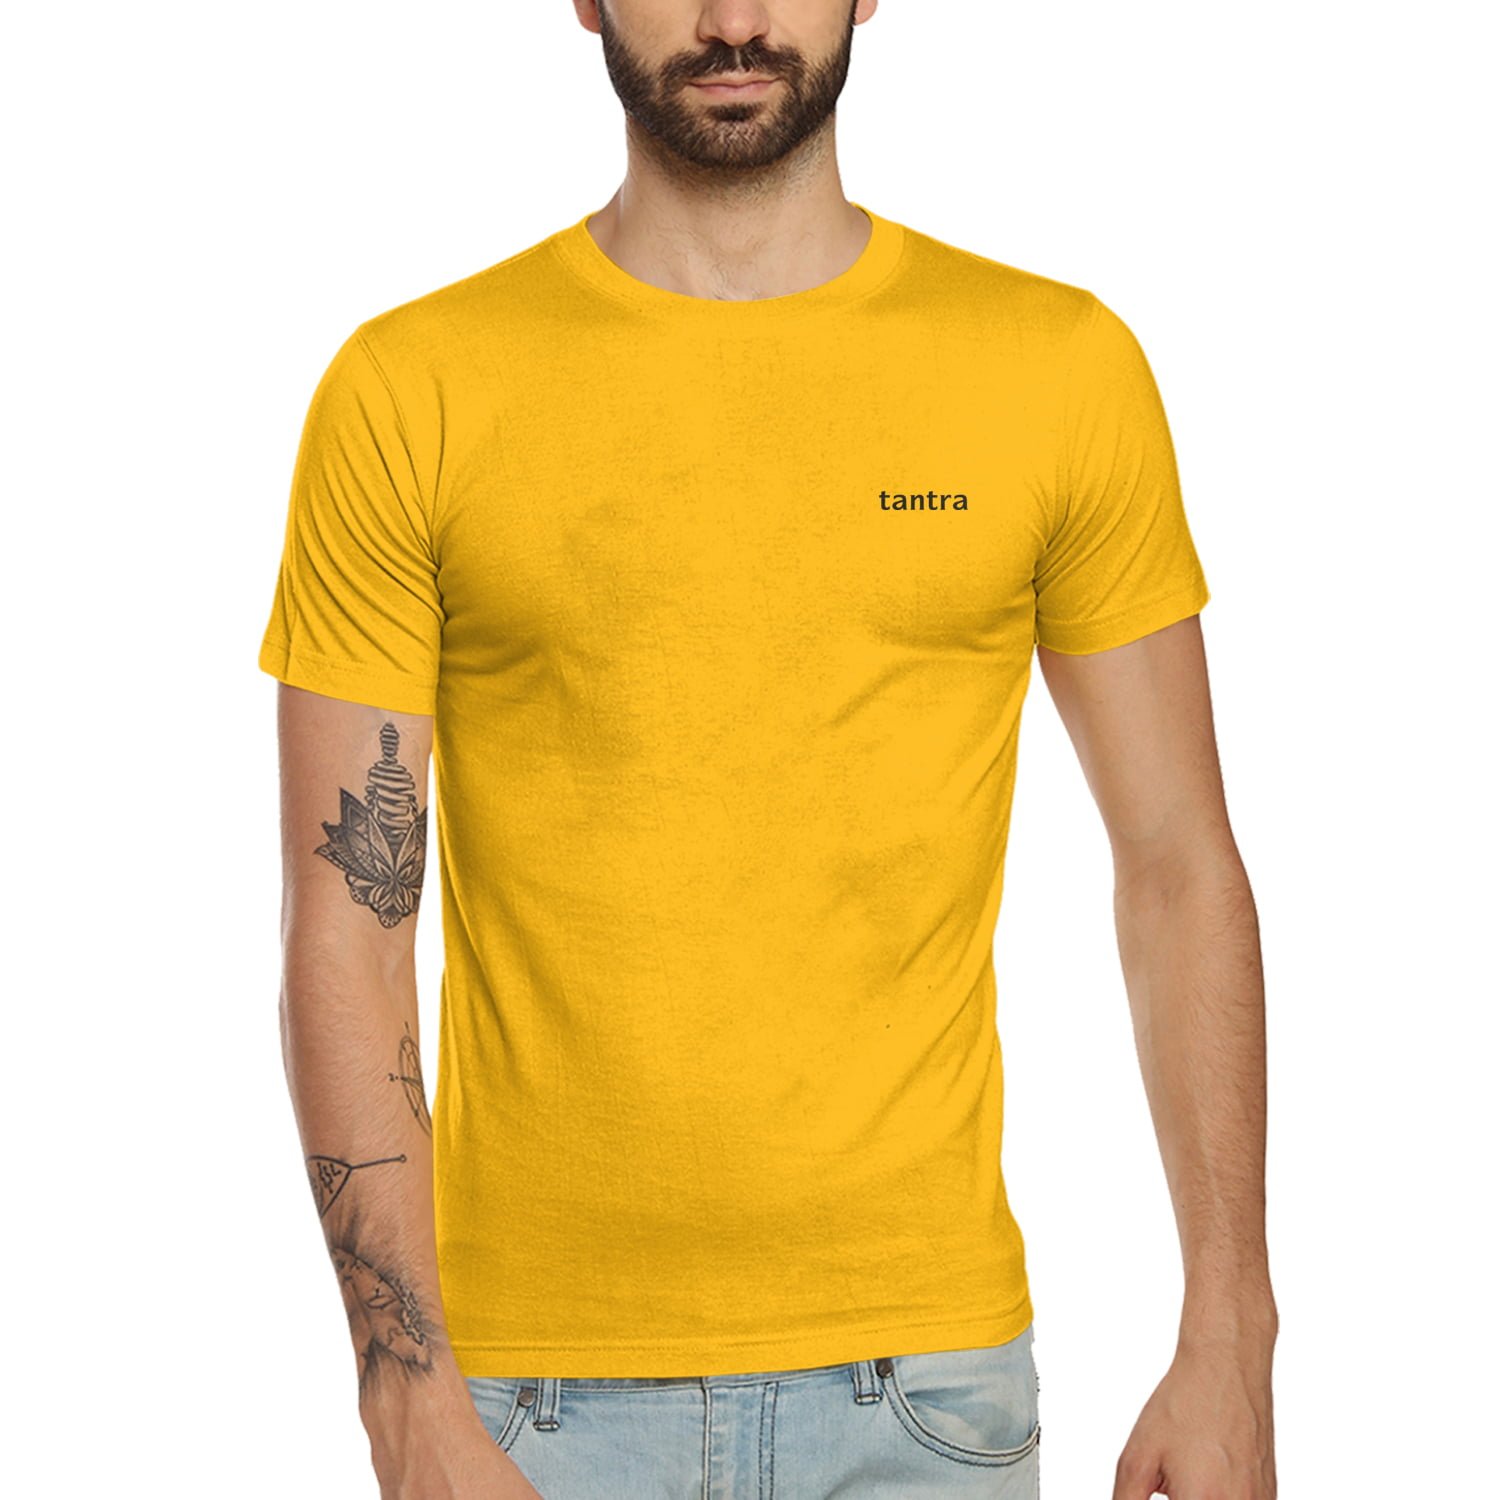 Unisex Promo T-Shirt – Yellow – Discount Clothes and Accessories